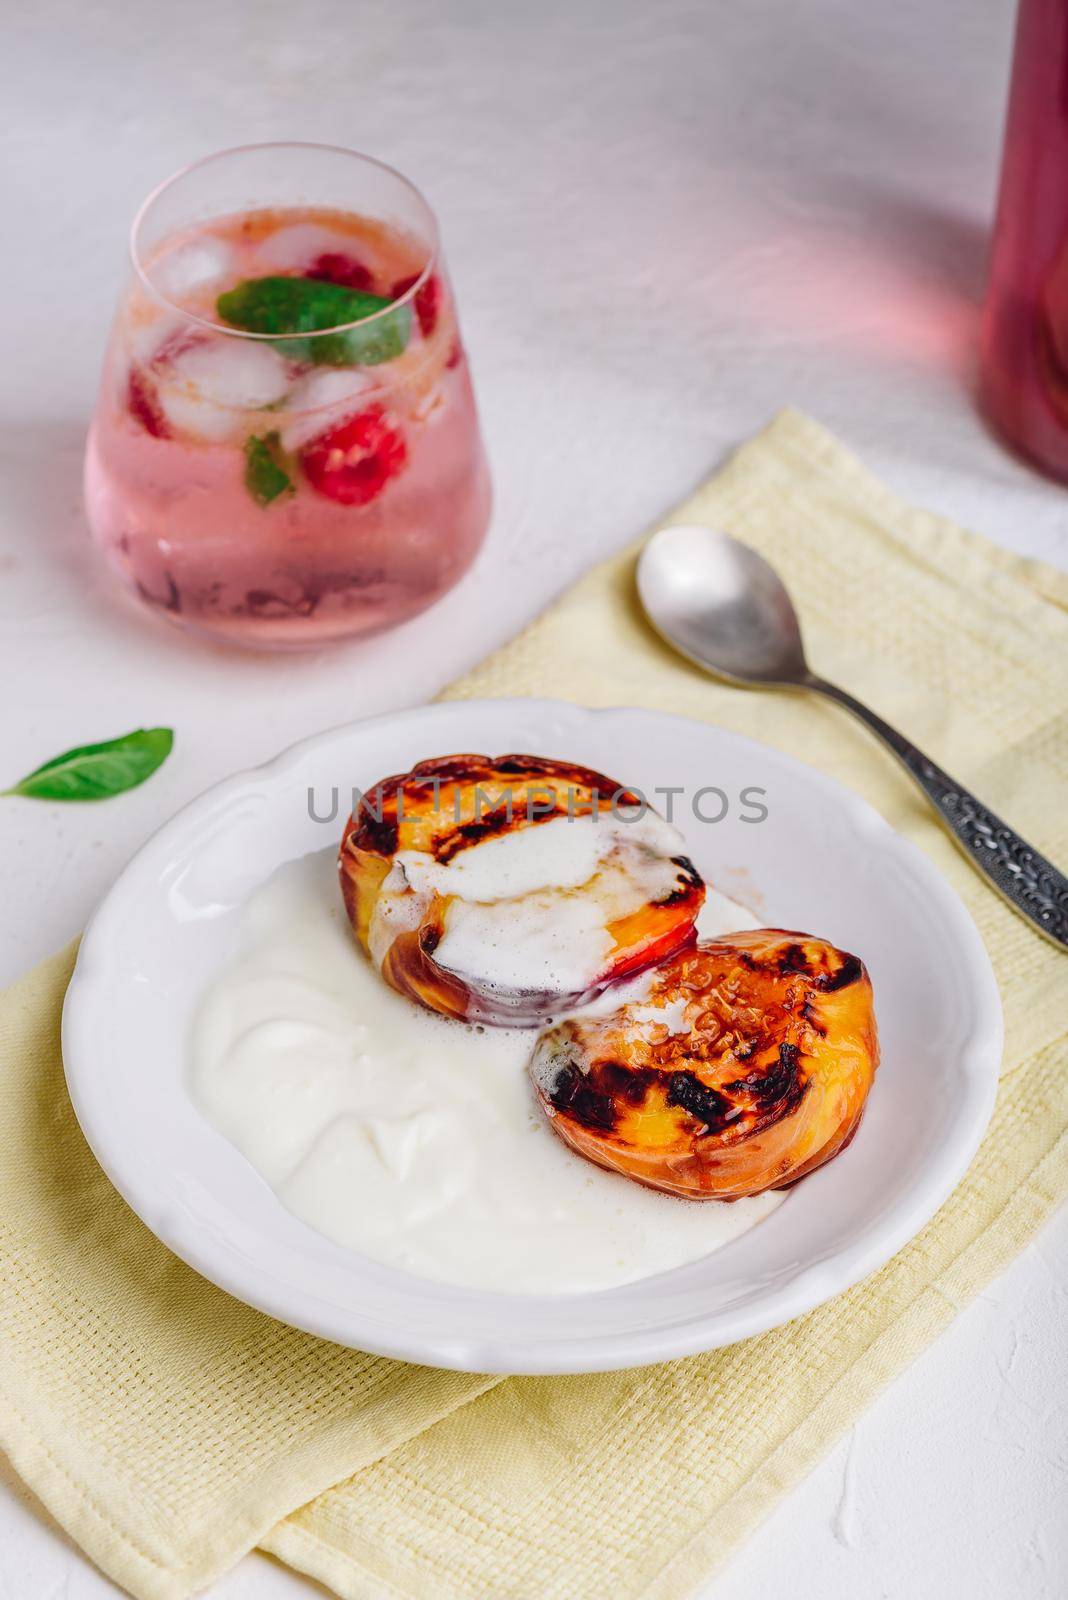 Served Oven Roasted Peaches with Honey and Whipped Heavy Cream on White Plate and Glass of Raspberry, Mint Mocktail